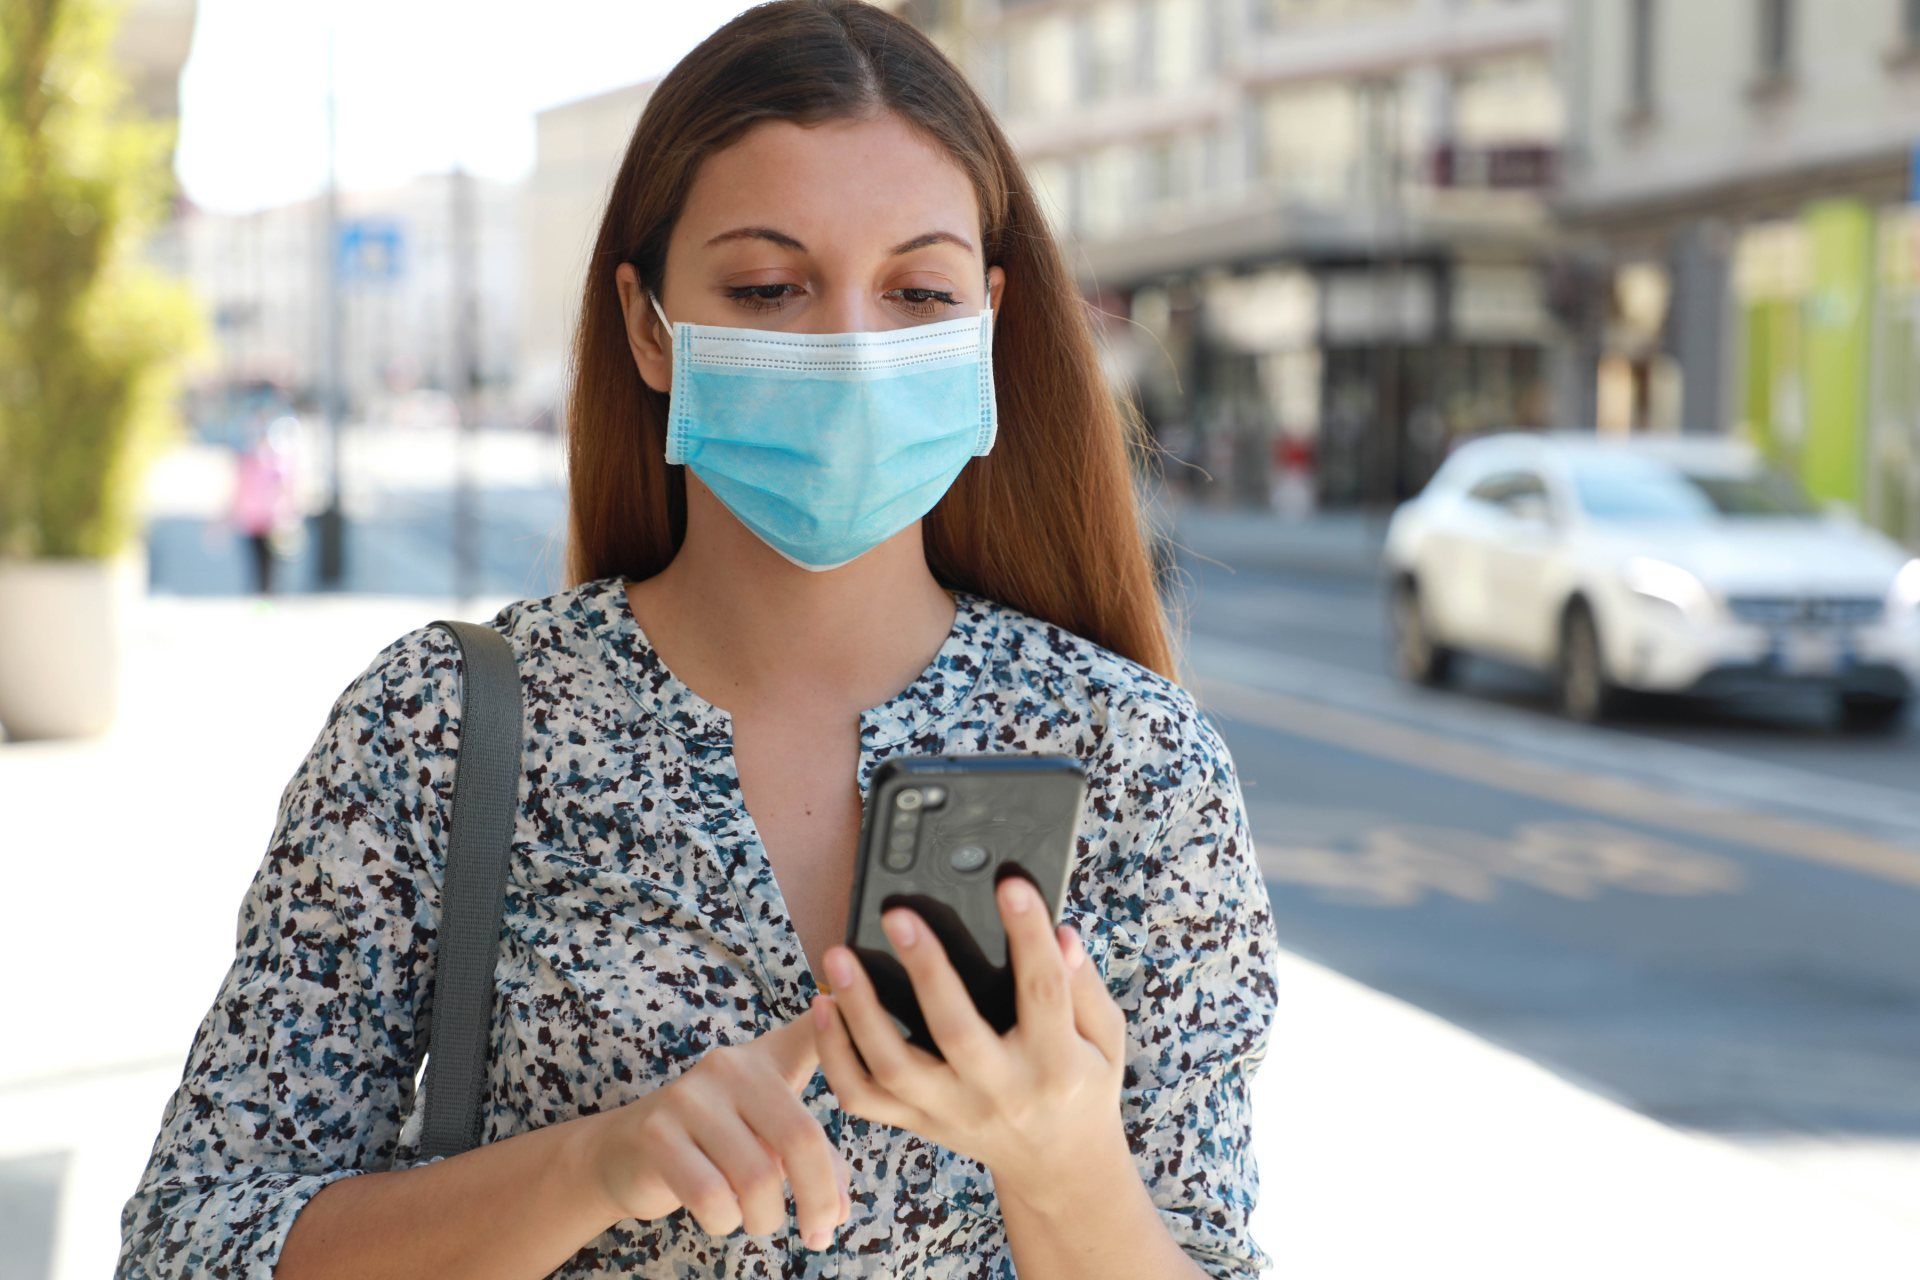 Woman in surgical mask stands on city street, using a smartphone - coronavirus tracker app